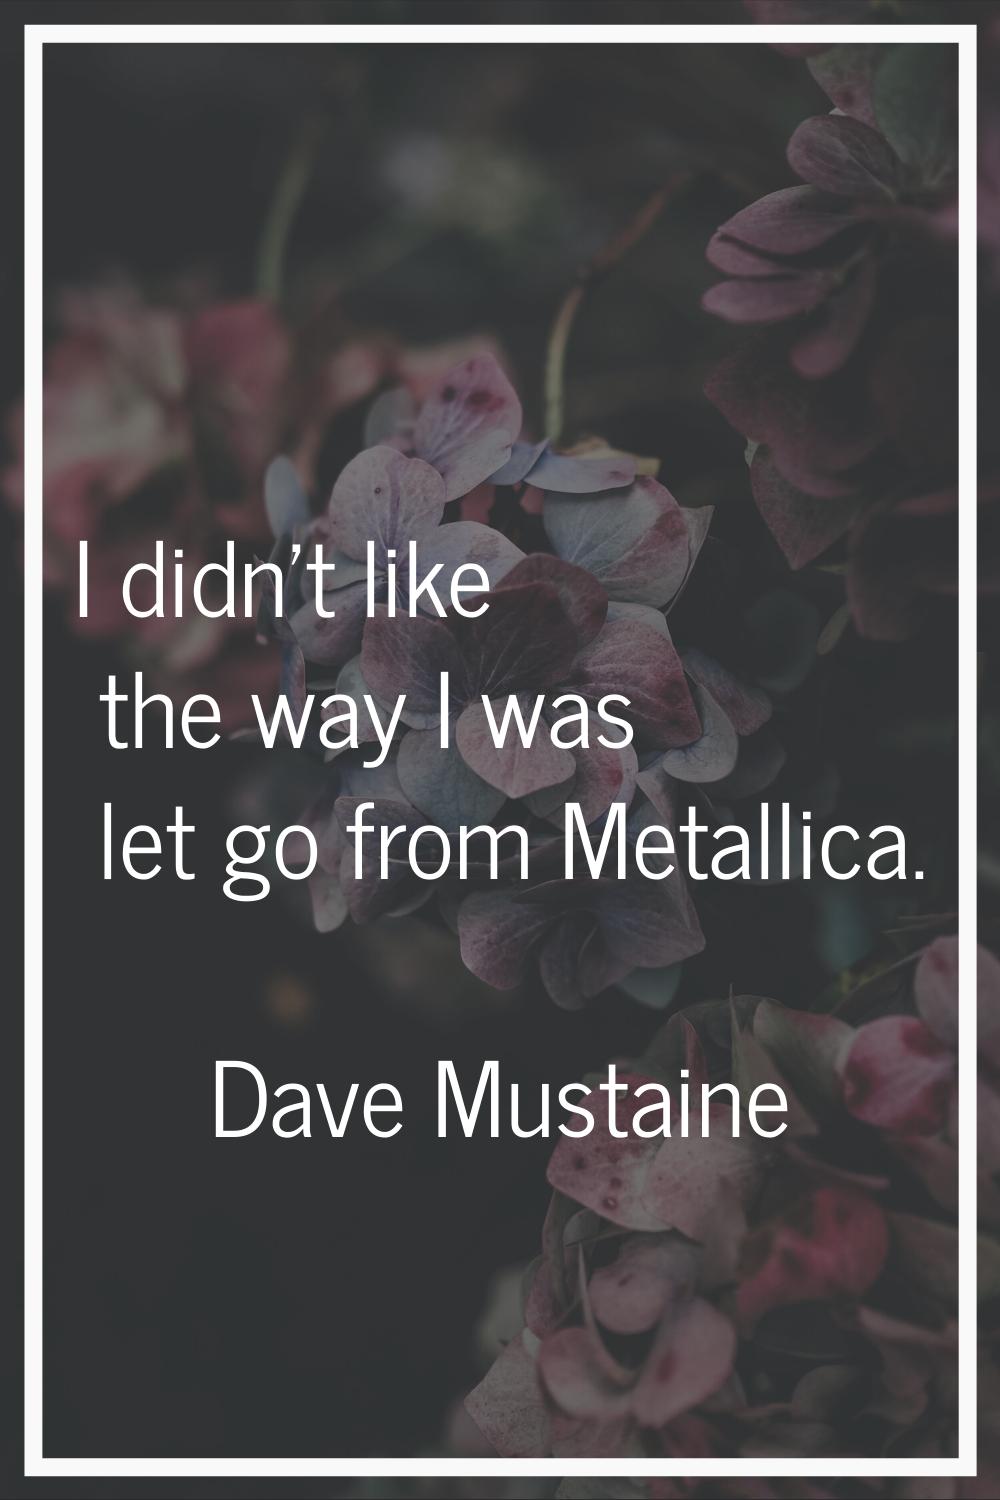 I didn't like the way I was let go from Metallica.